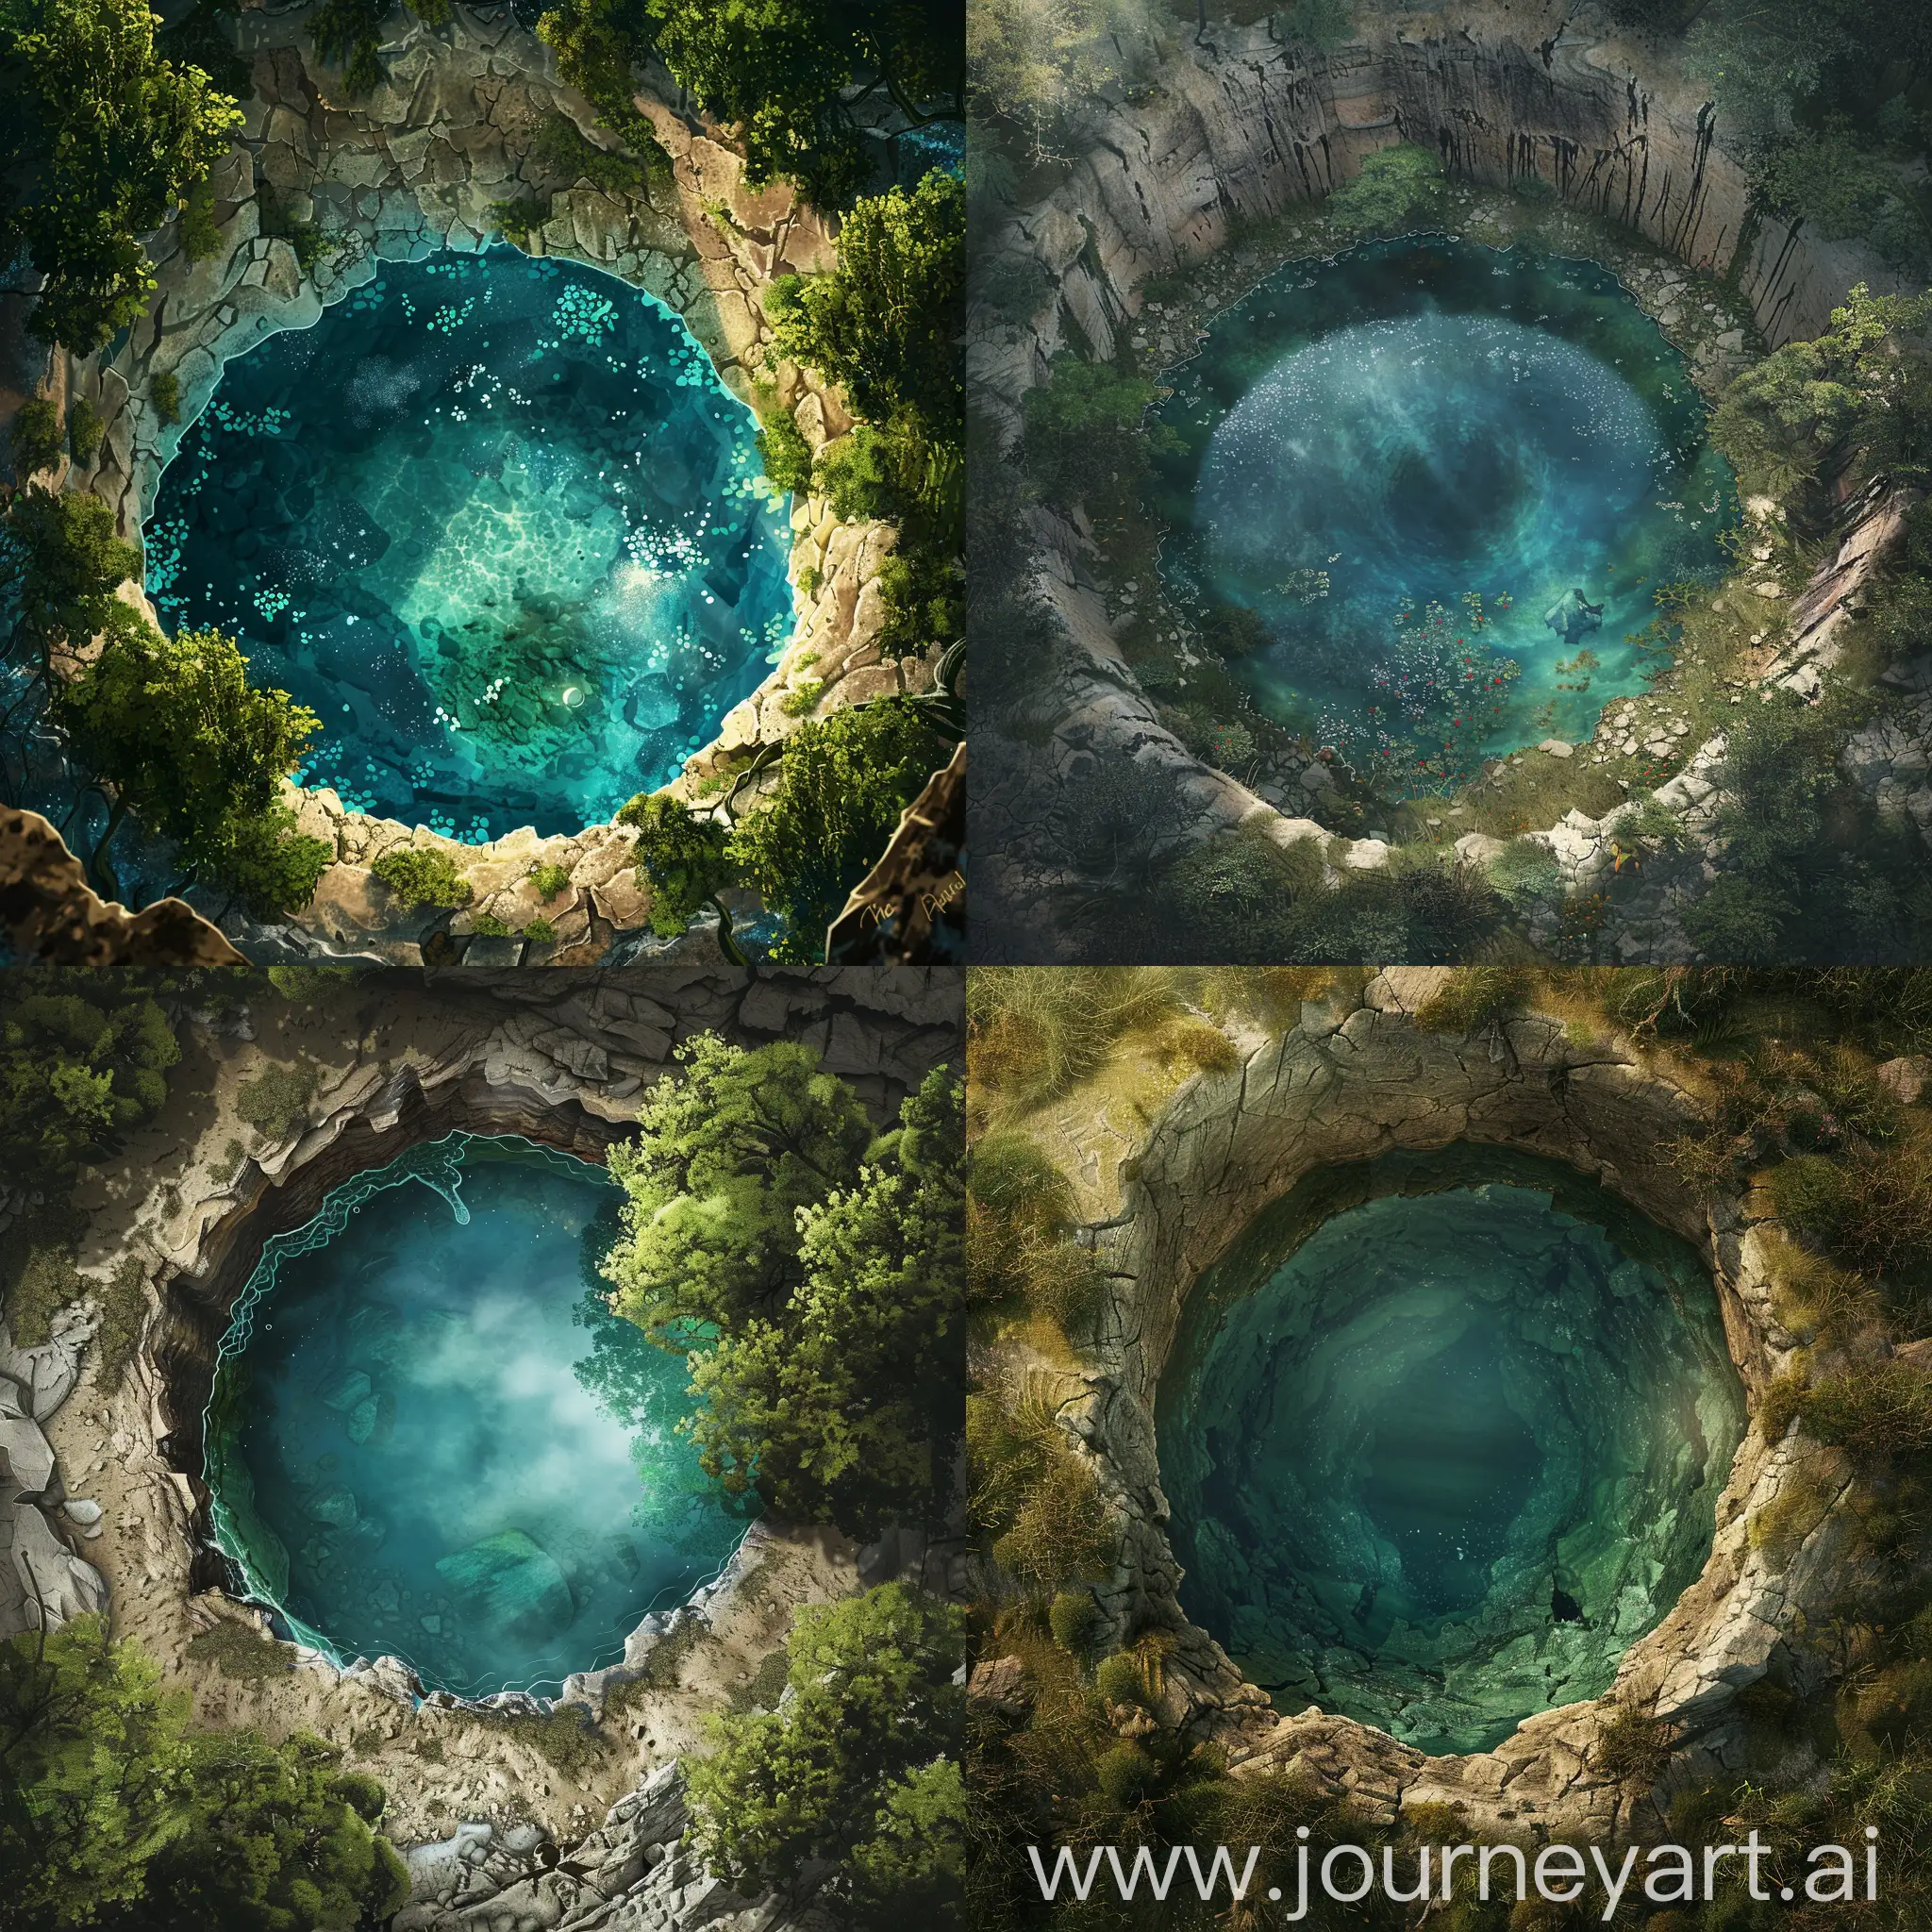 An story named "The Magical Lake", a lake in a hole seen from above, book coverbook cover, digital art,